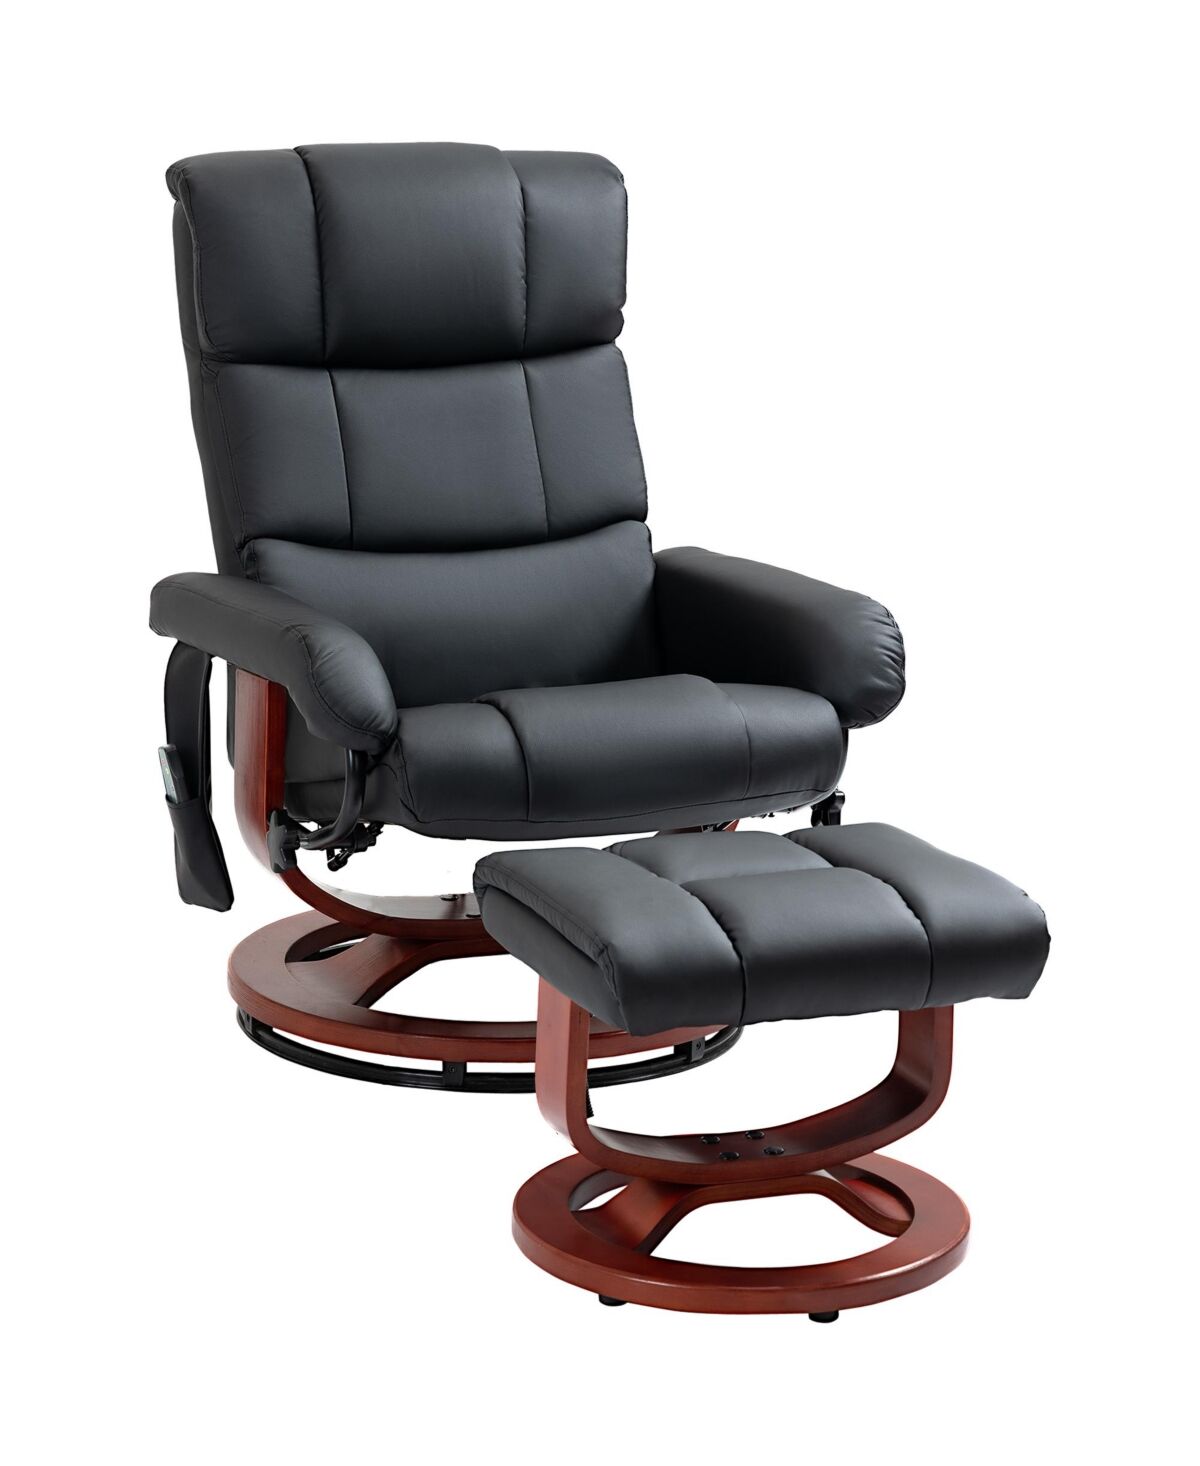 Homcom Recliner Chair with Ottoman, Electric Faux Leather Recliner with 10 Vibration Points and 5 Massage Mode, Reclining Chair with Swivel Wood Base,